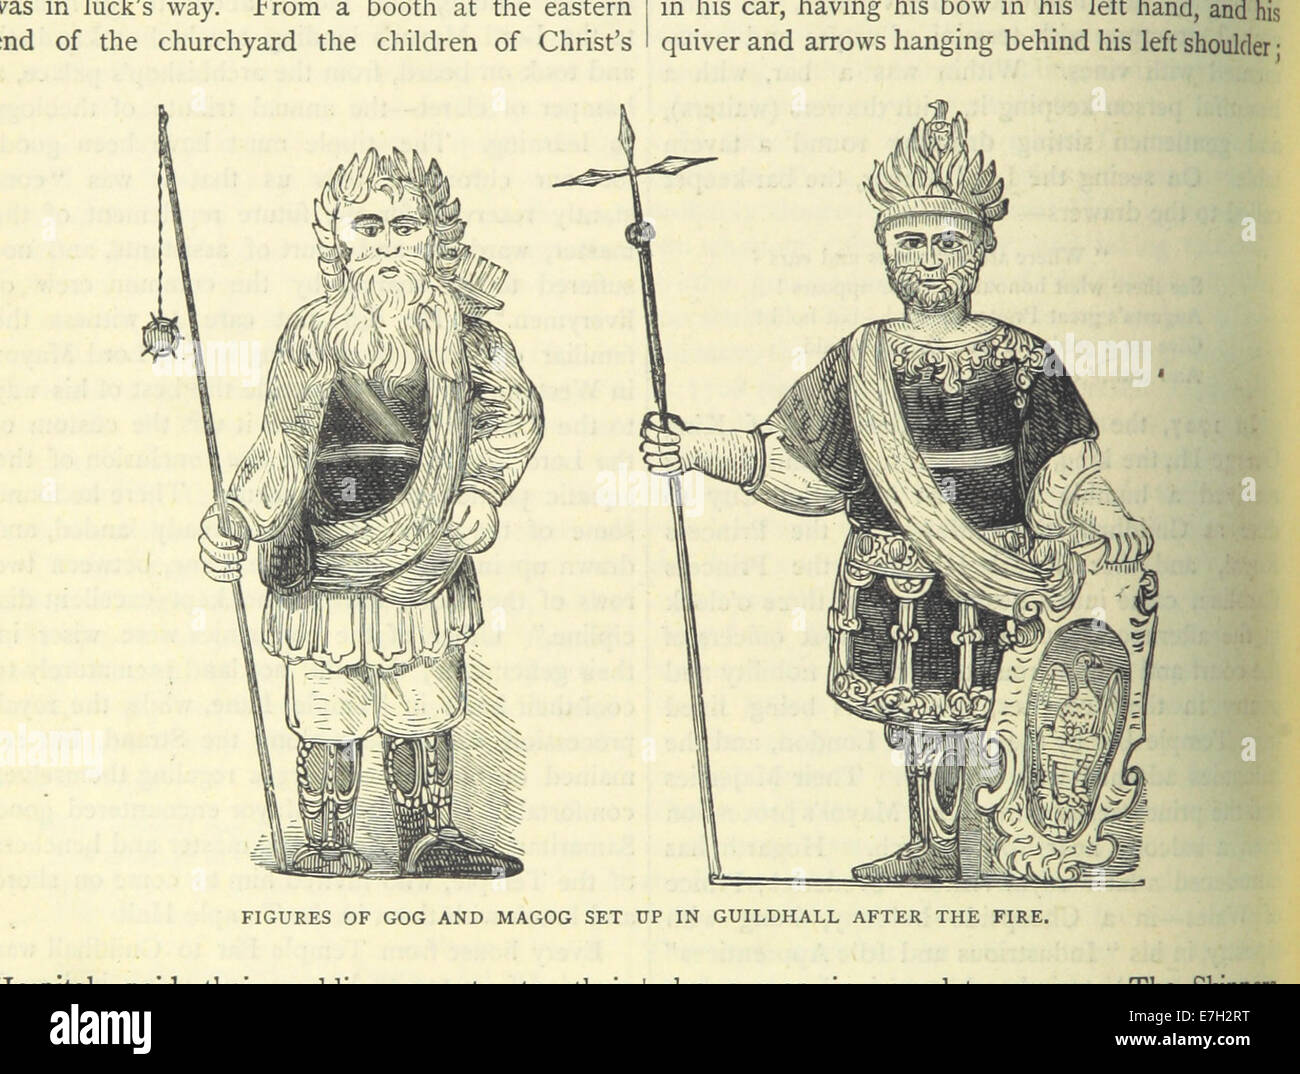 ONL (1887) 1.324 - Figures of Gog and Magog set up in Guildhall after the Fire Stock Photo